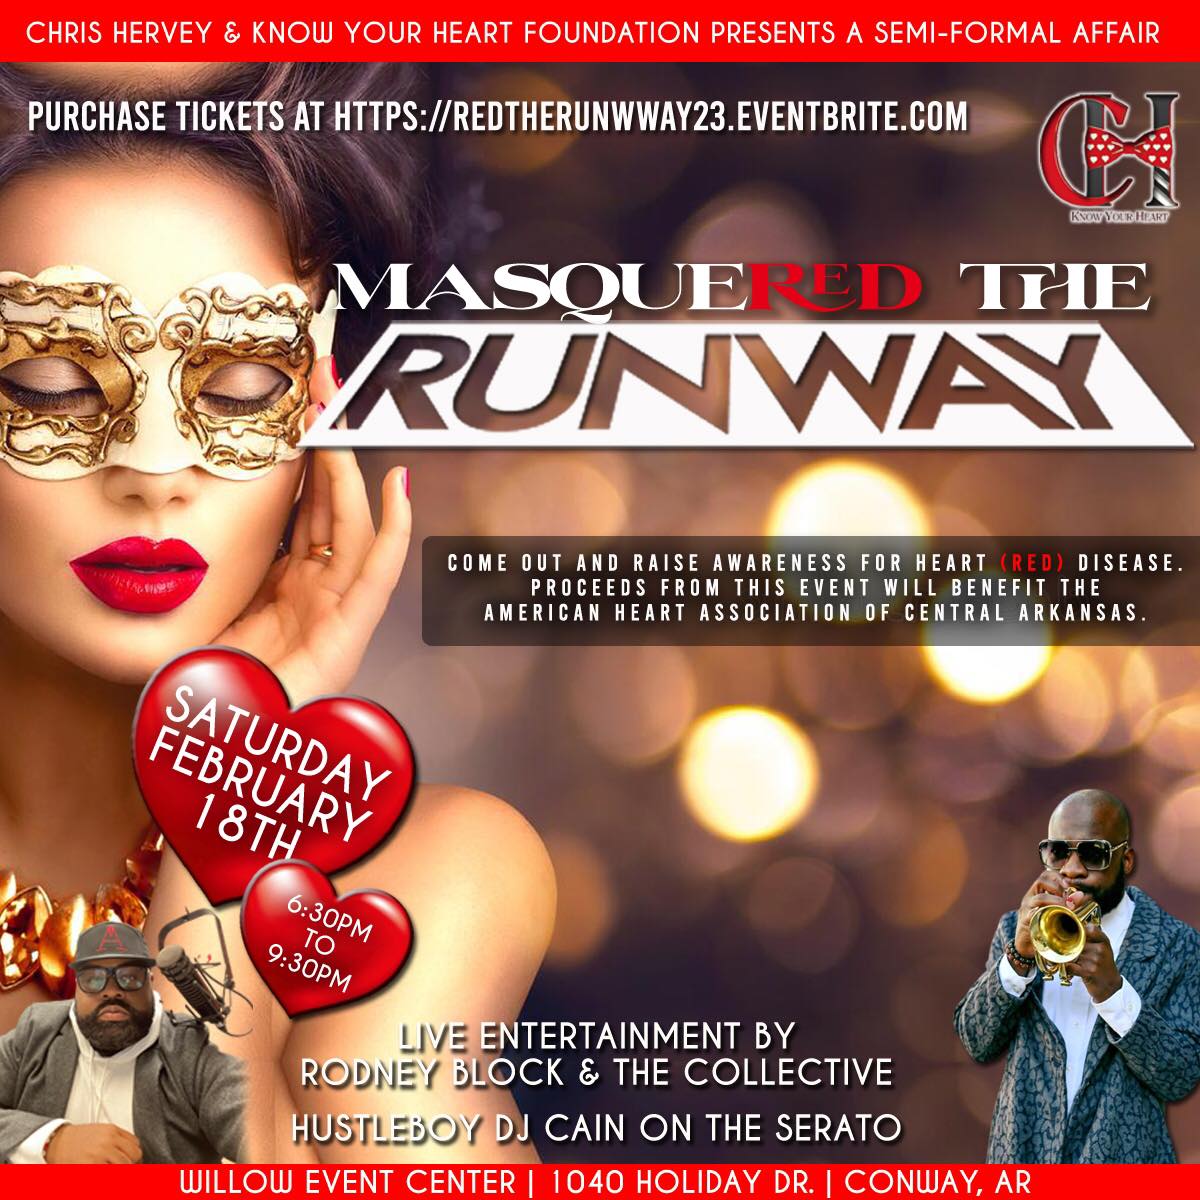 The Red Runway